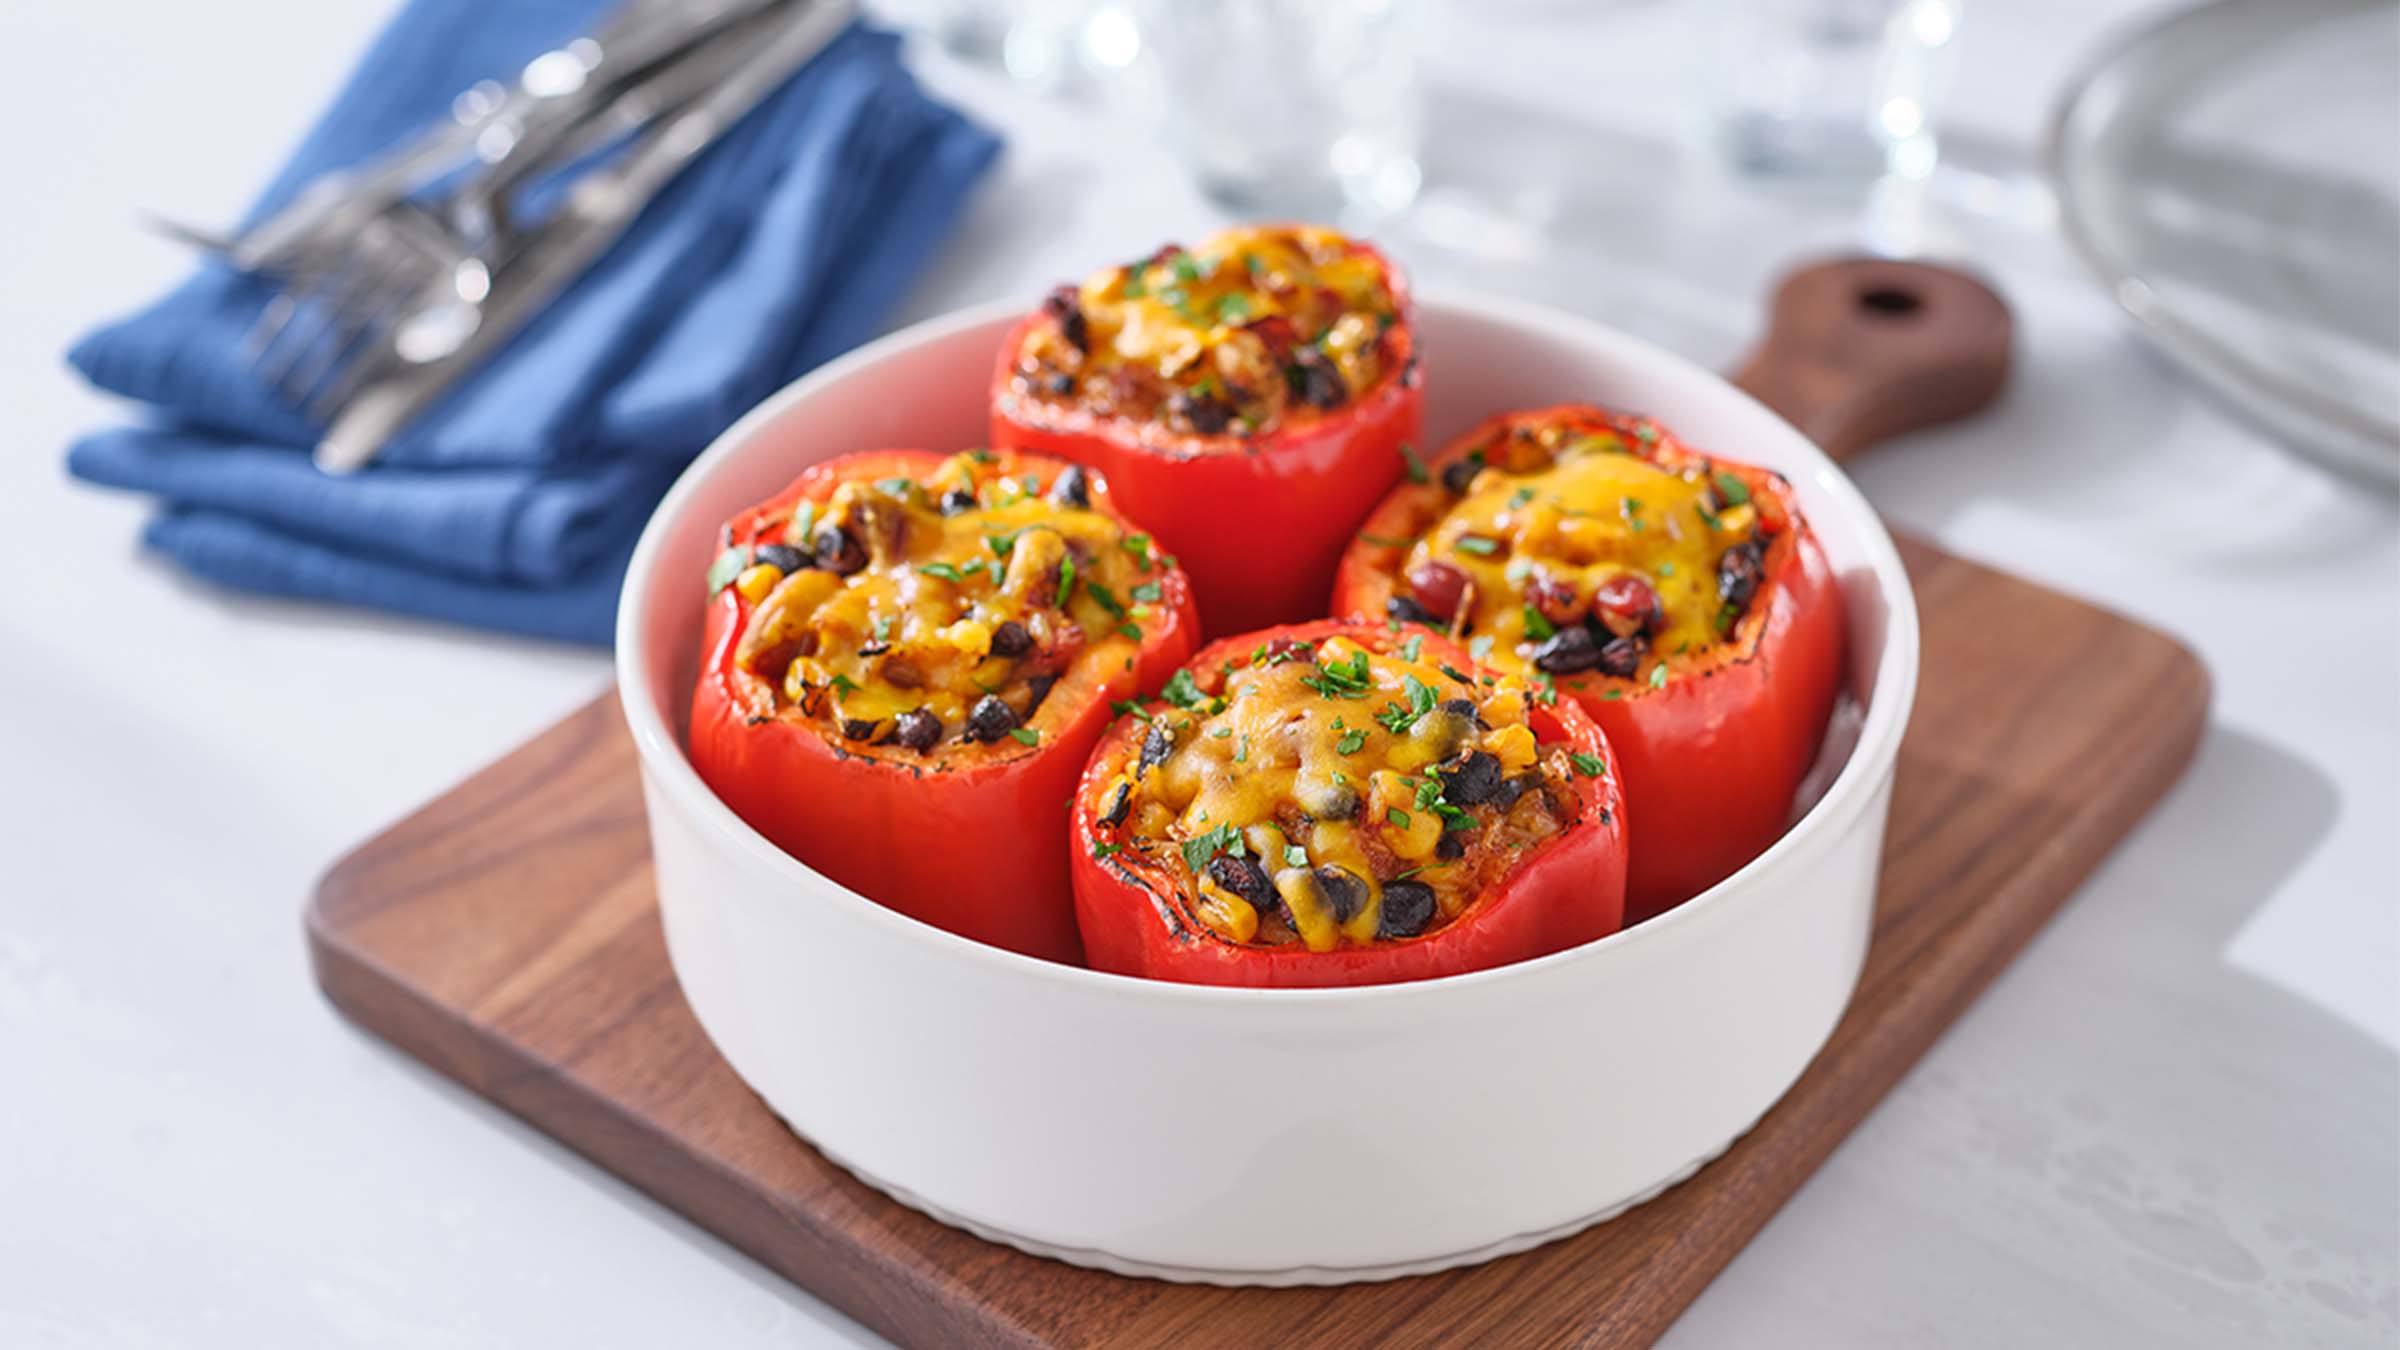 Leftover Chili Stuffed Peppers